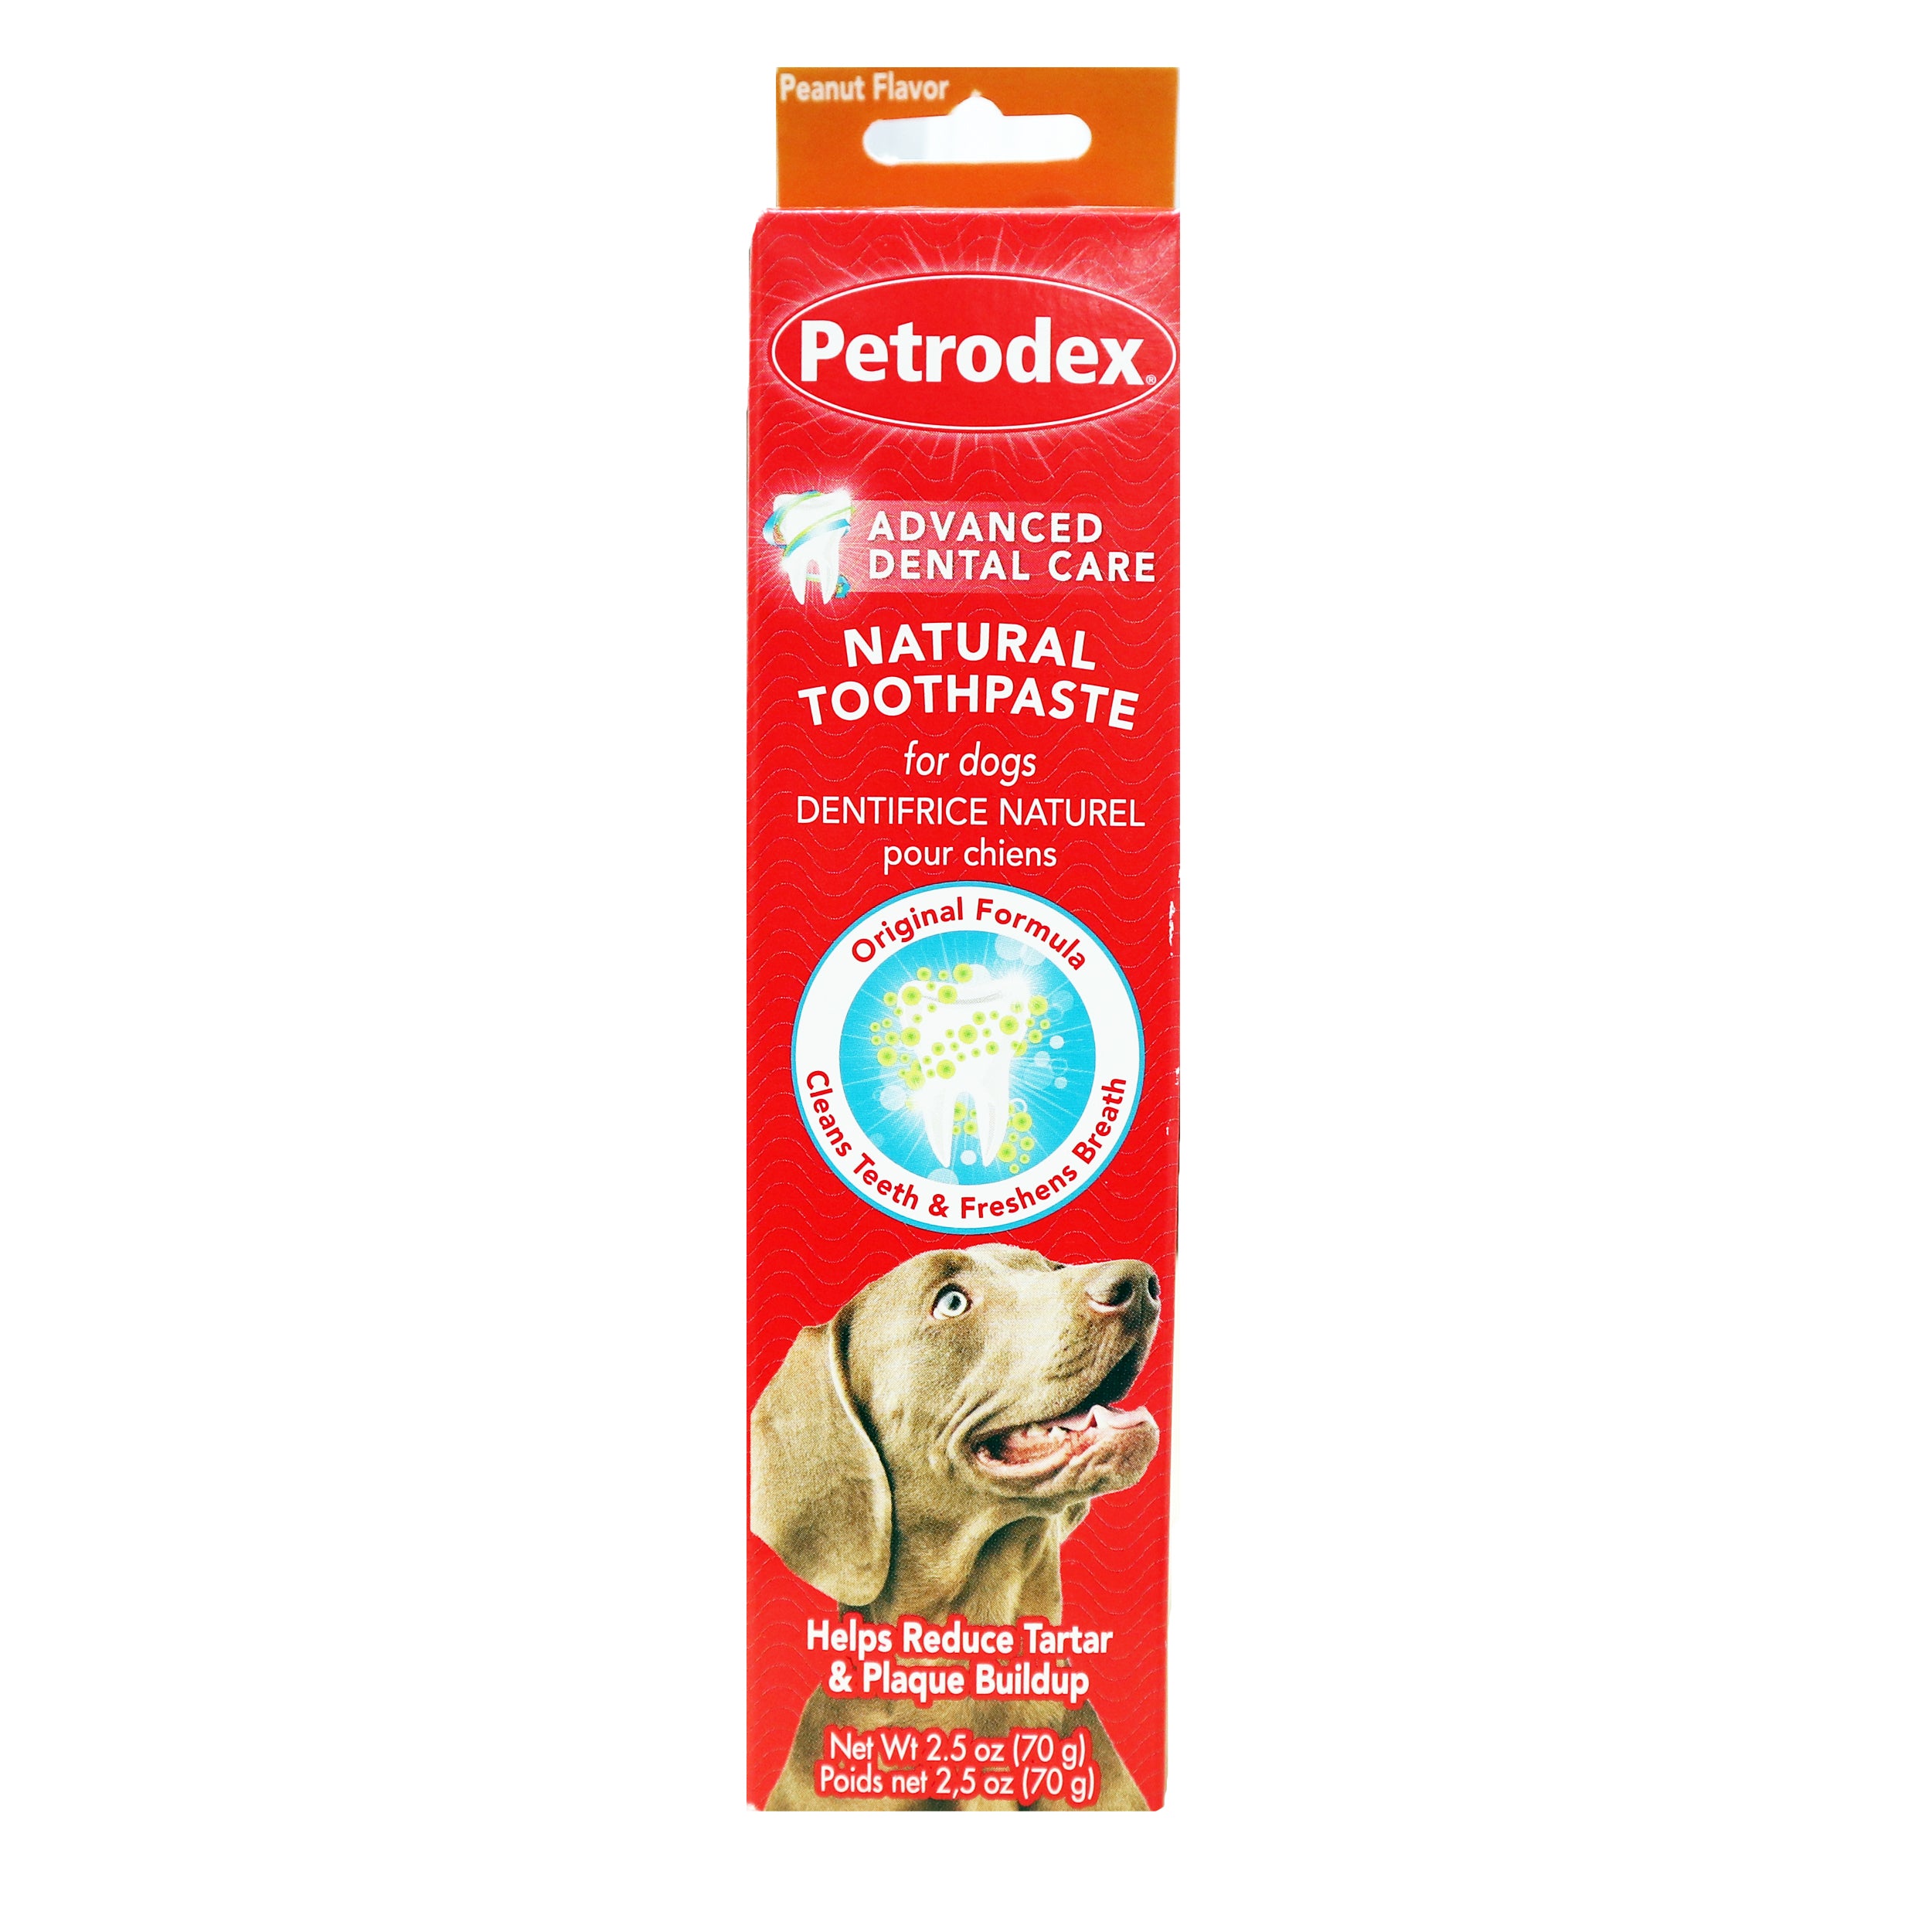 Petrodex Advanced Dental Care Natural Toothpase for Dogs